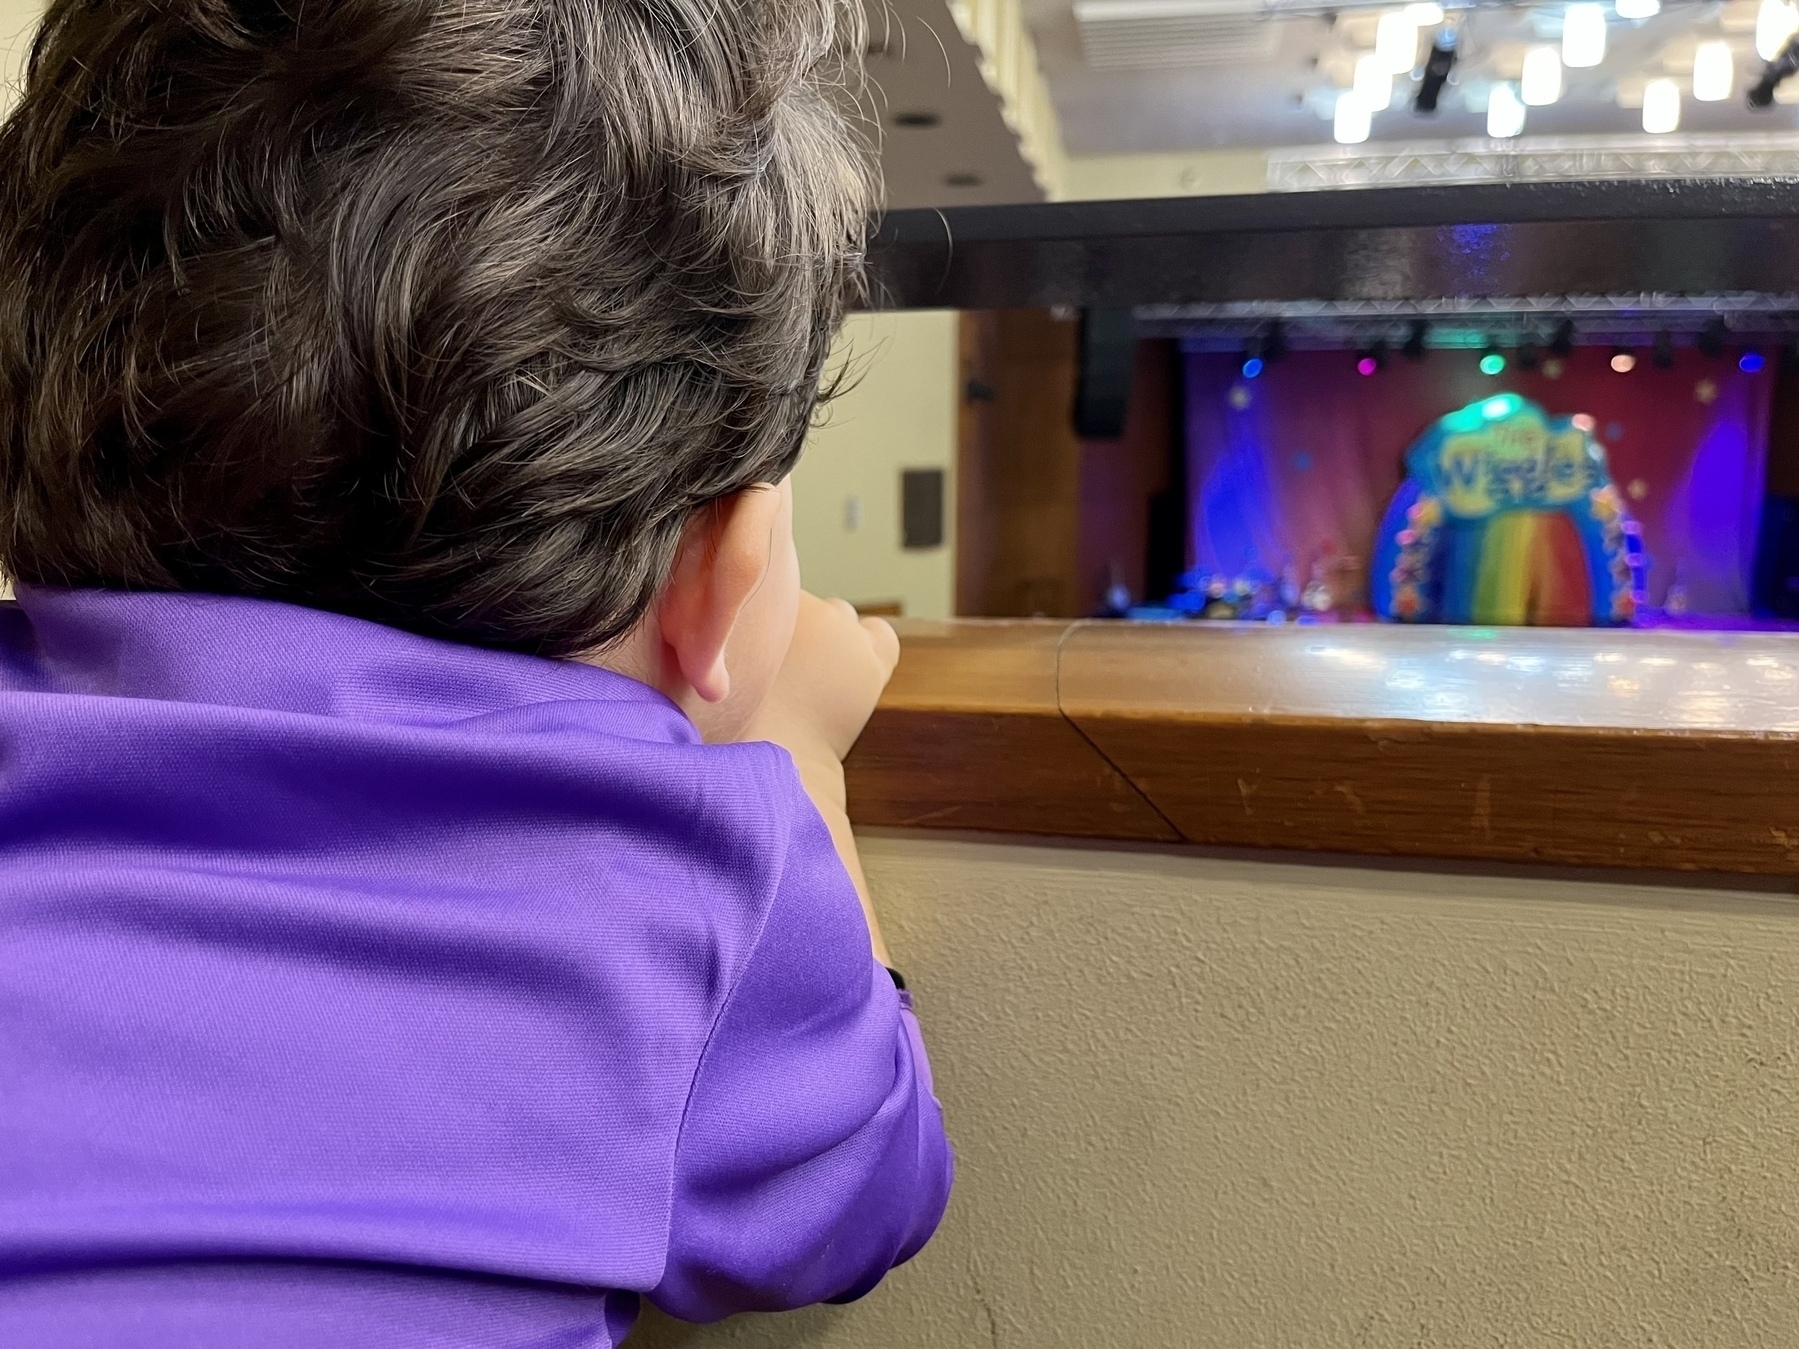 A toddler in a purple skivvy peers over a railing at the stage in a theatre, with a blurred Wiggles logo in the distance.